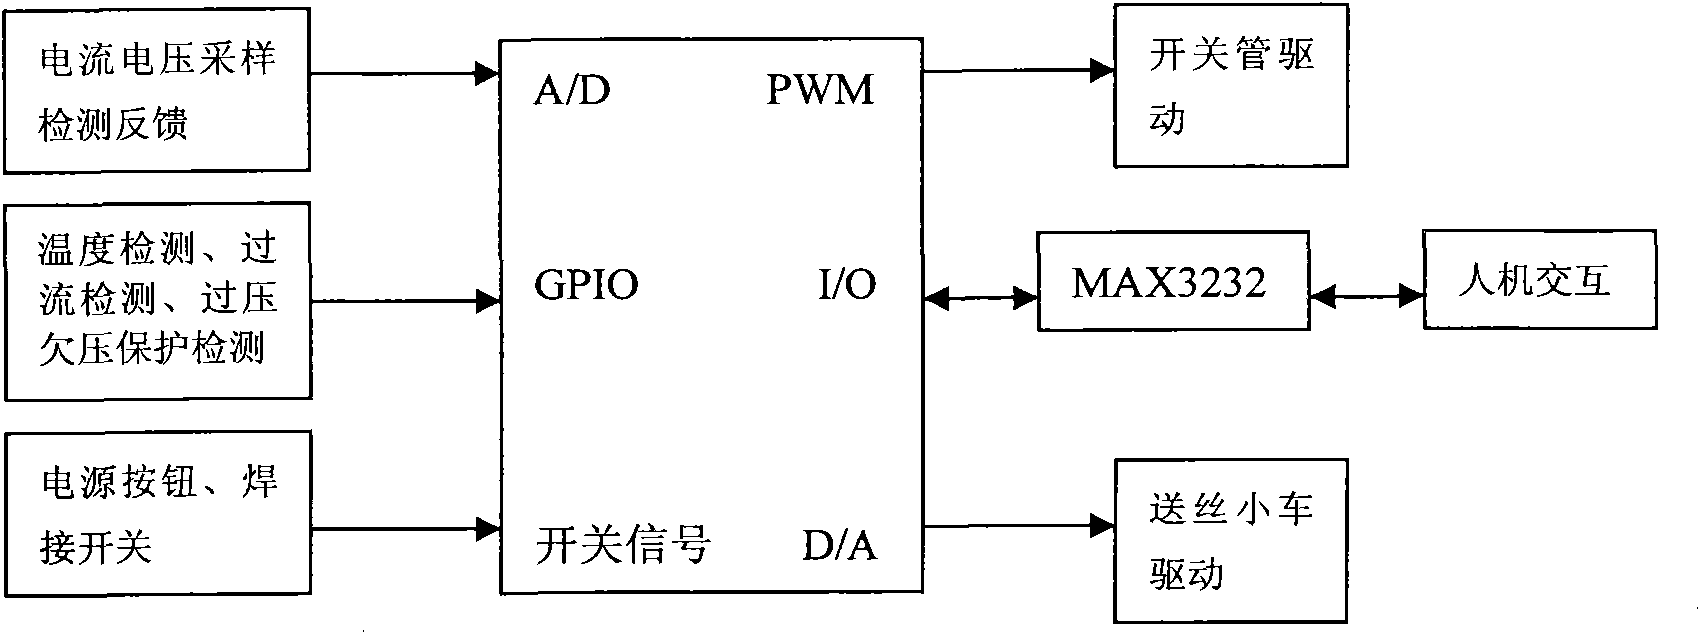 Gas-protective submerged-arc welding digitalized power supply system for dual ARM (Automated Route Management) control and control method thereof